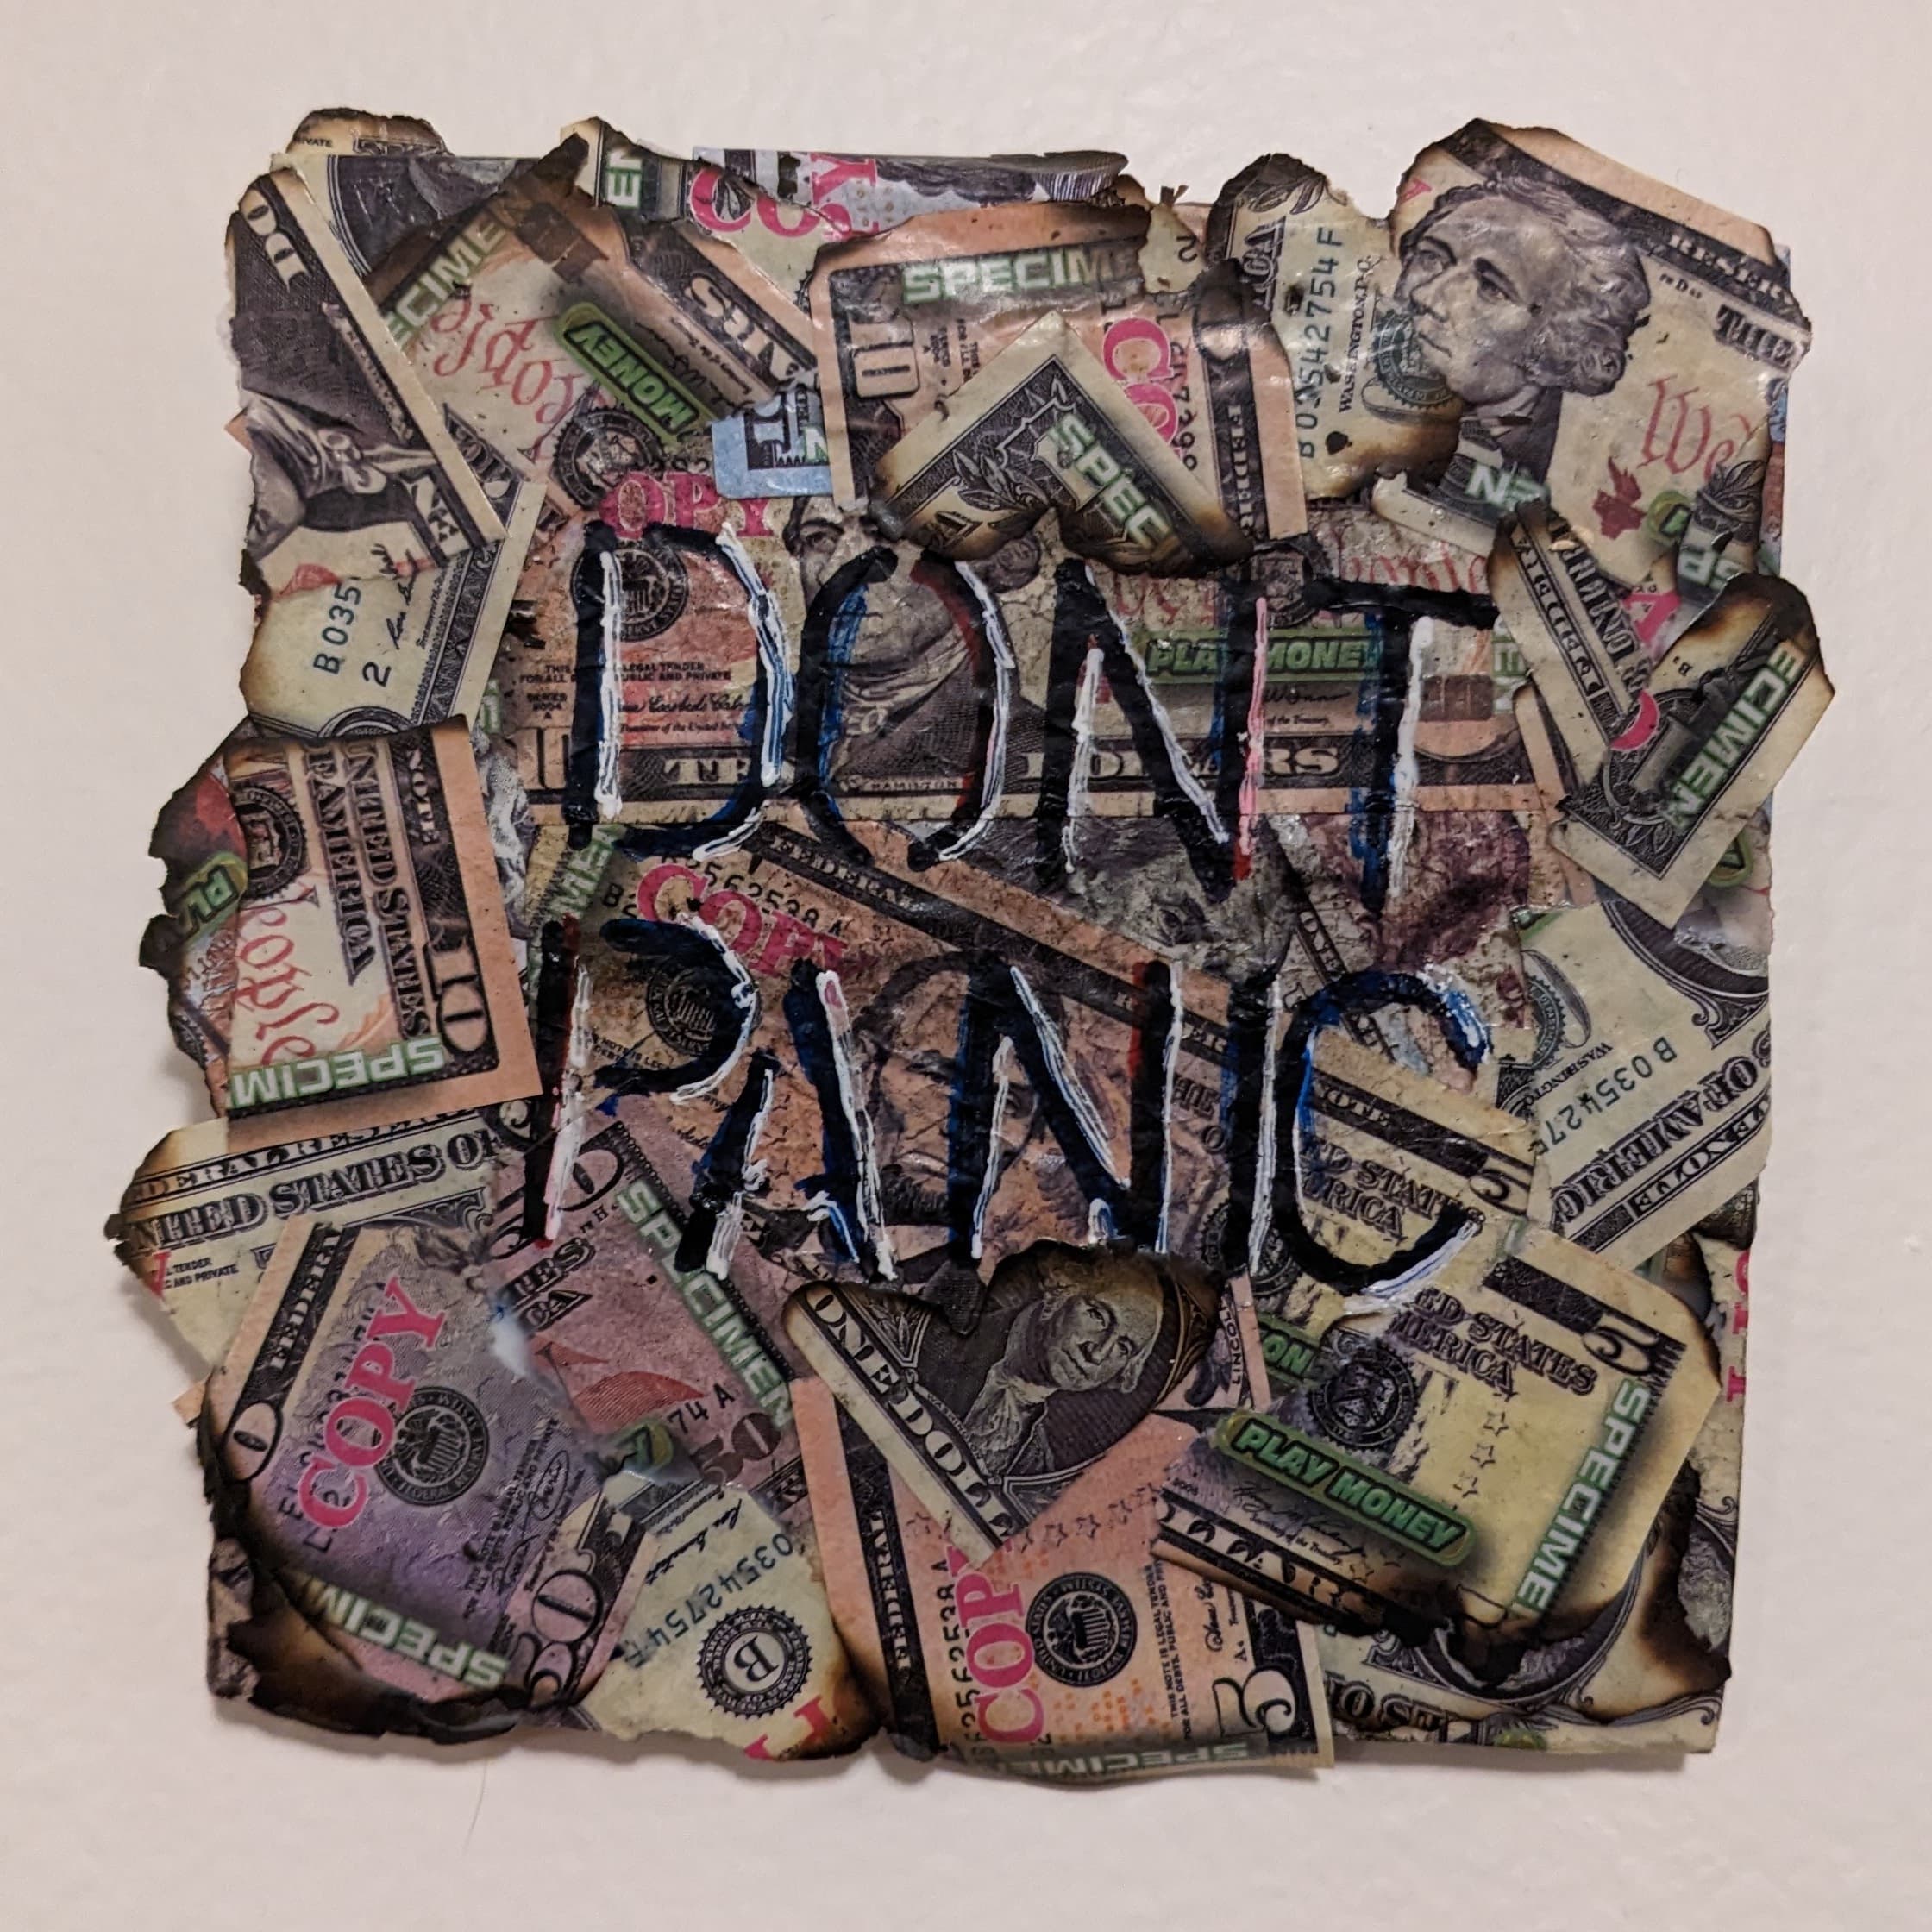 In light of the recent run on several US banks, this work uses fake or "play" money to parallel how banks and the government "play" with the money in the system, demonstrating how fragile our economic systems are. The words "DON'T PANIC" span the front, written with highlights of red, white, and blue to connote the government message to prevent a run on the banks.